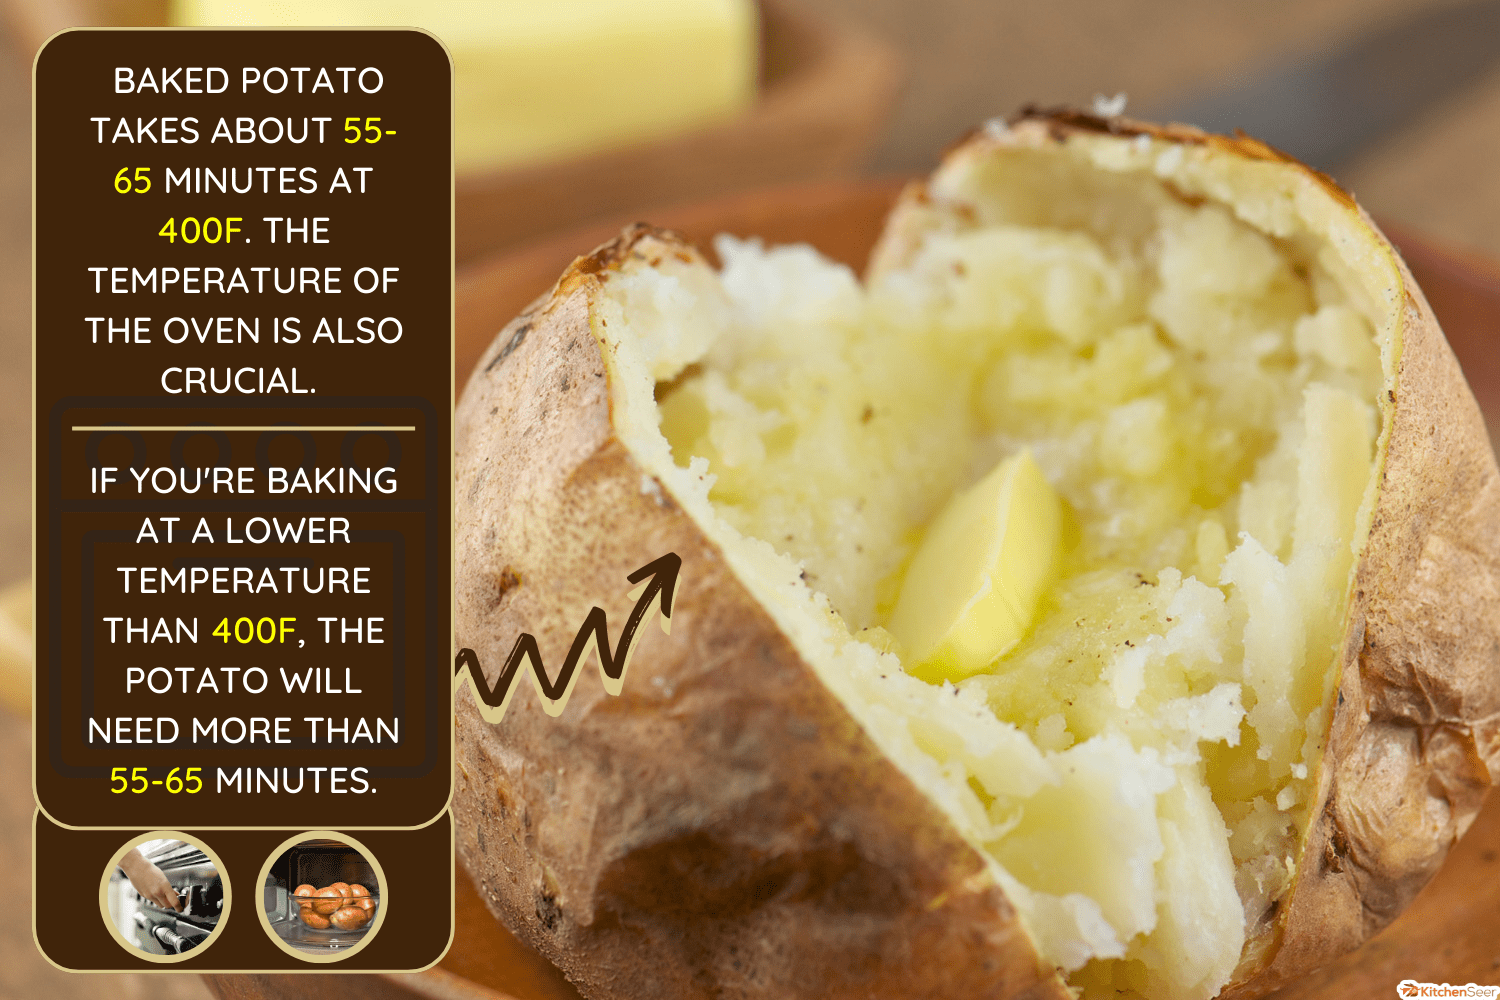 Baked potato with melted butter and freshly ground pepper in wooden bowl - Why Is My Baked Potato Hard